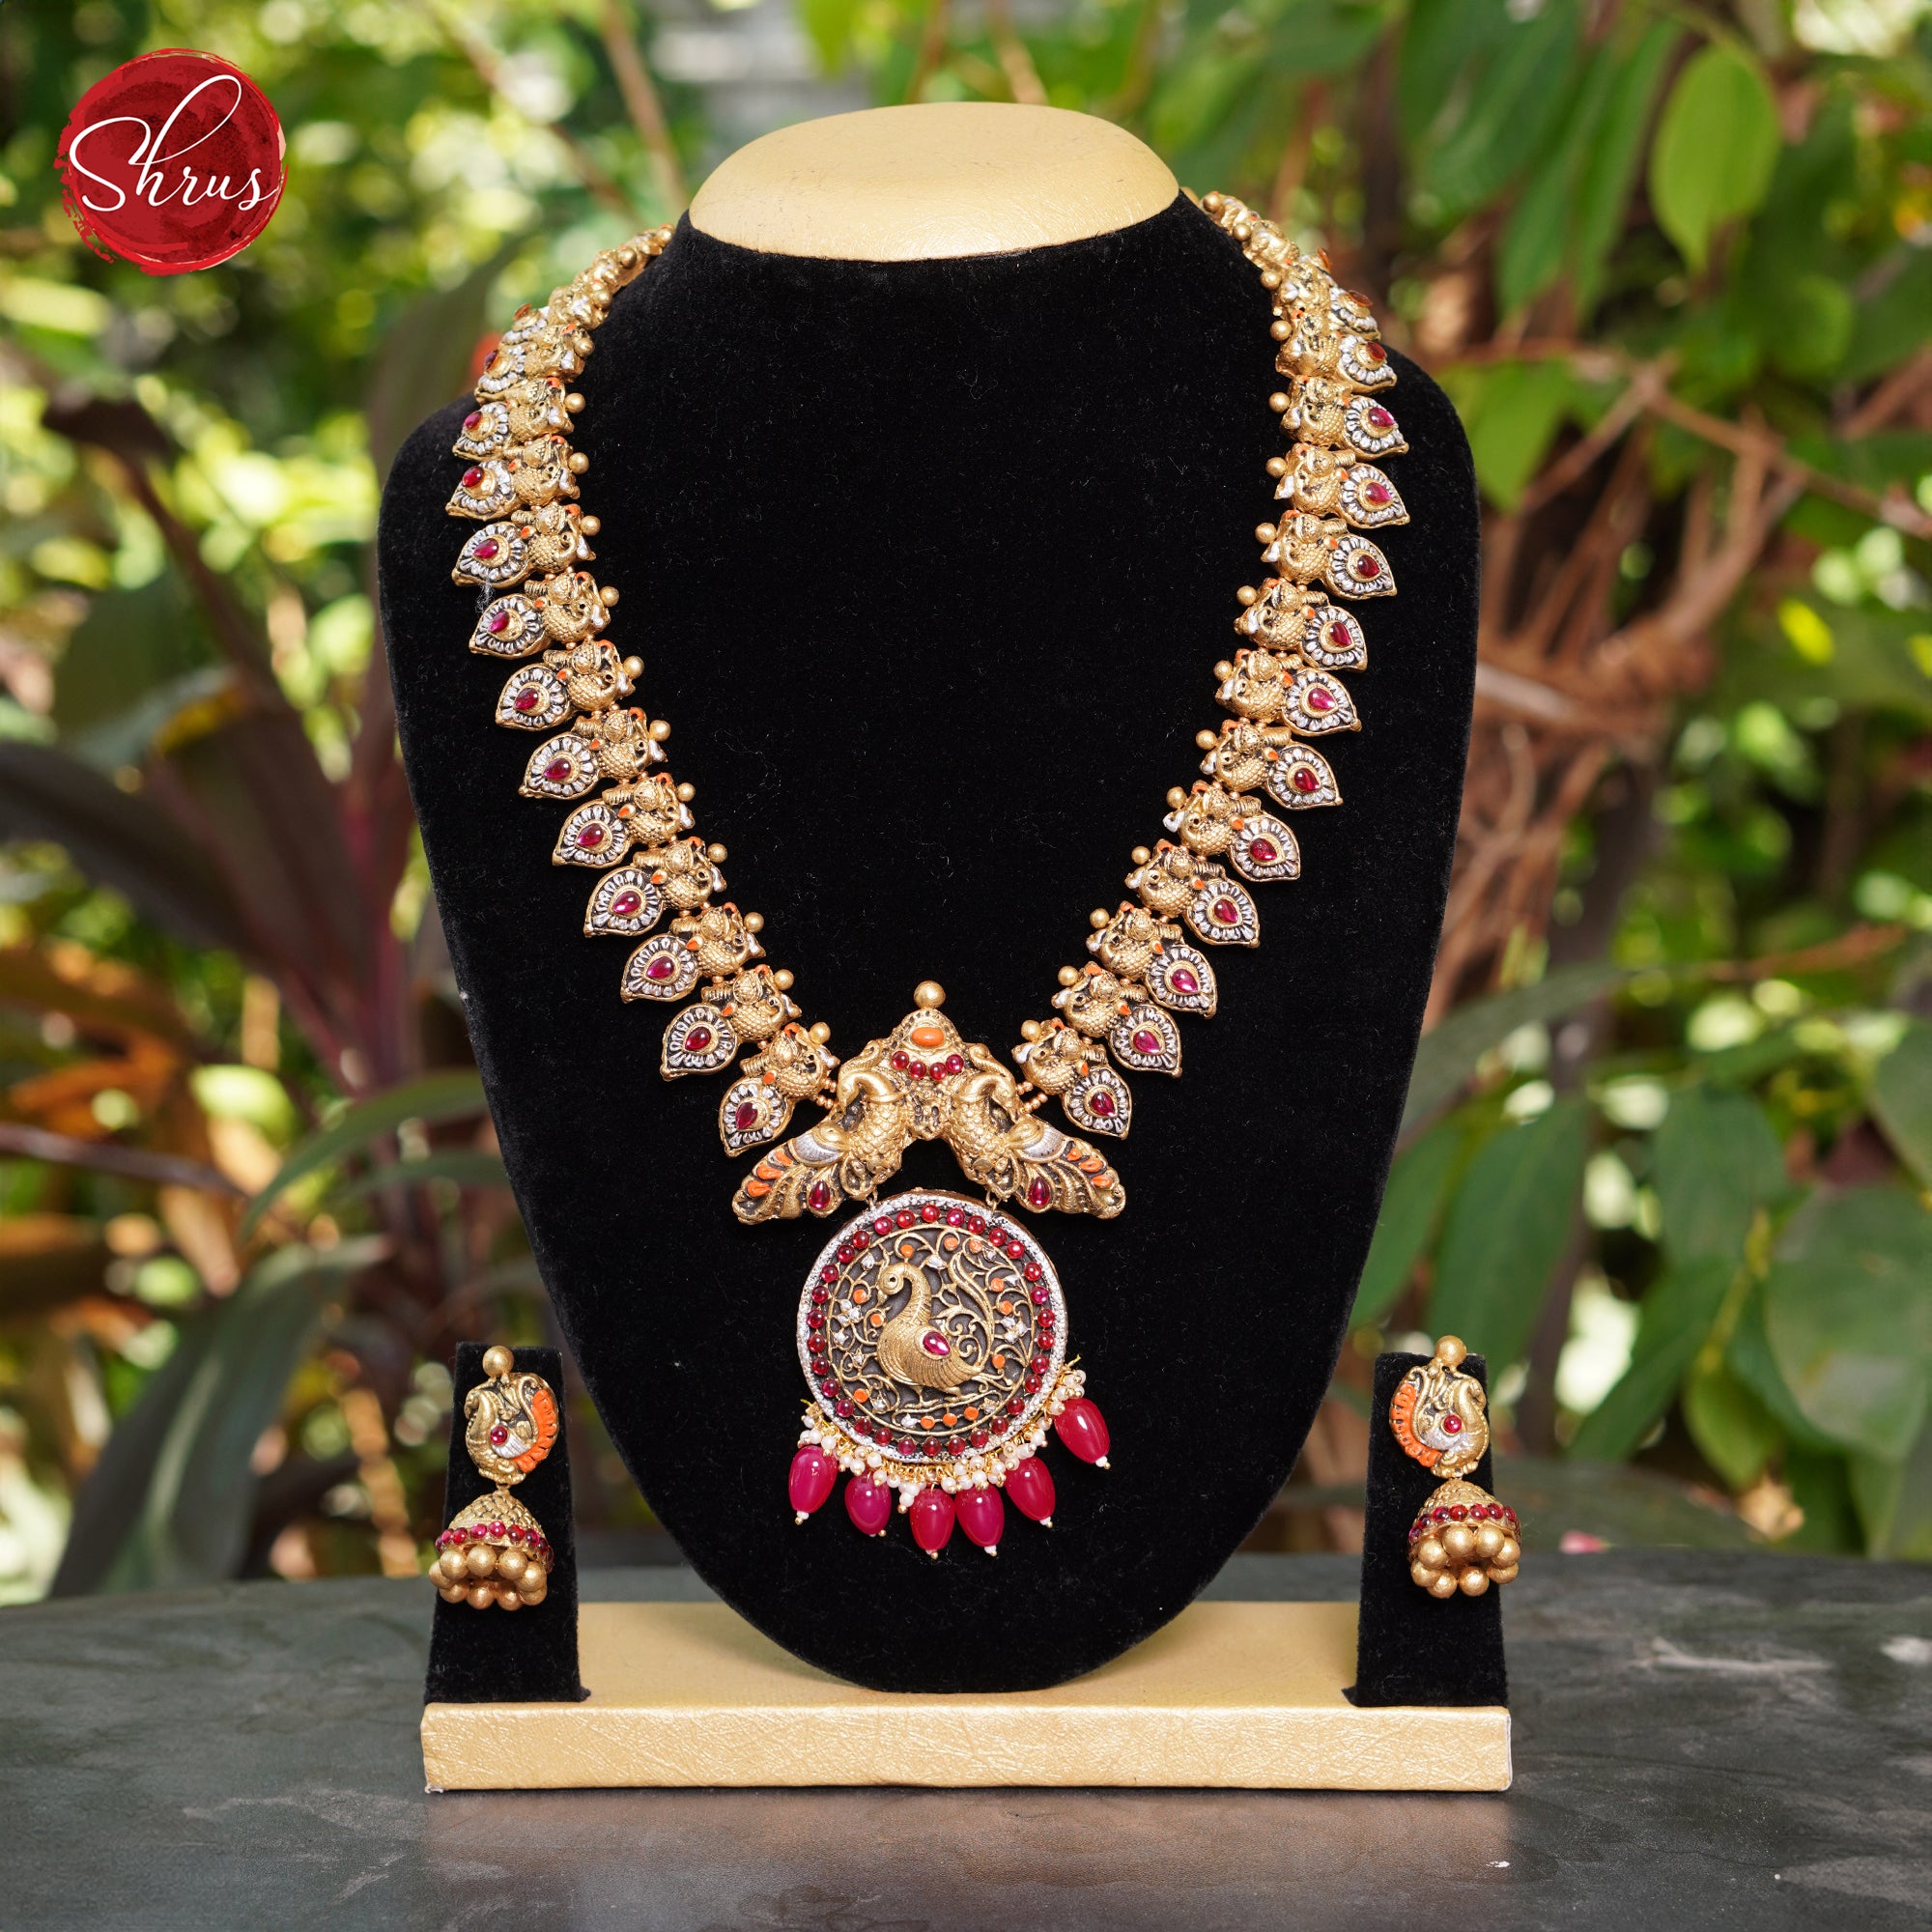 Manga Necklace with peacock pendant terracotta jewellery with jhumkas - Accessories - Shop on ShrusEternity.com